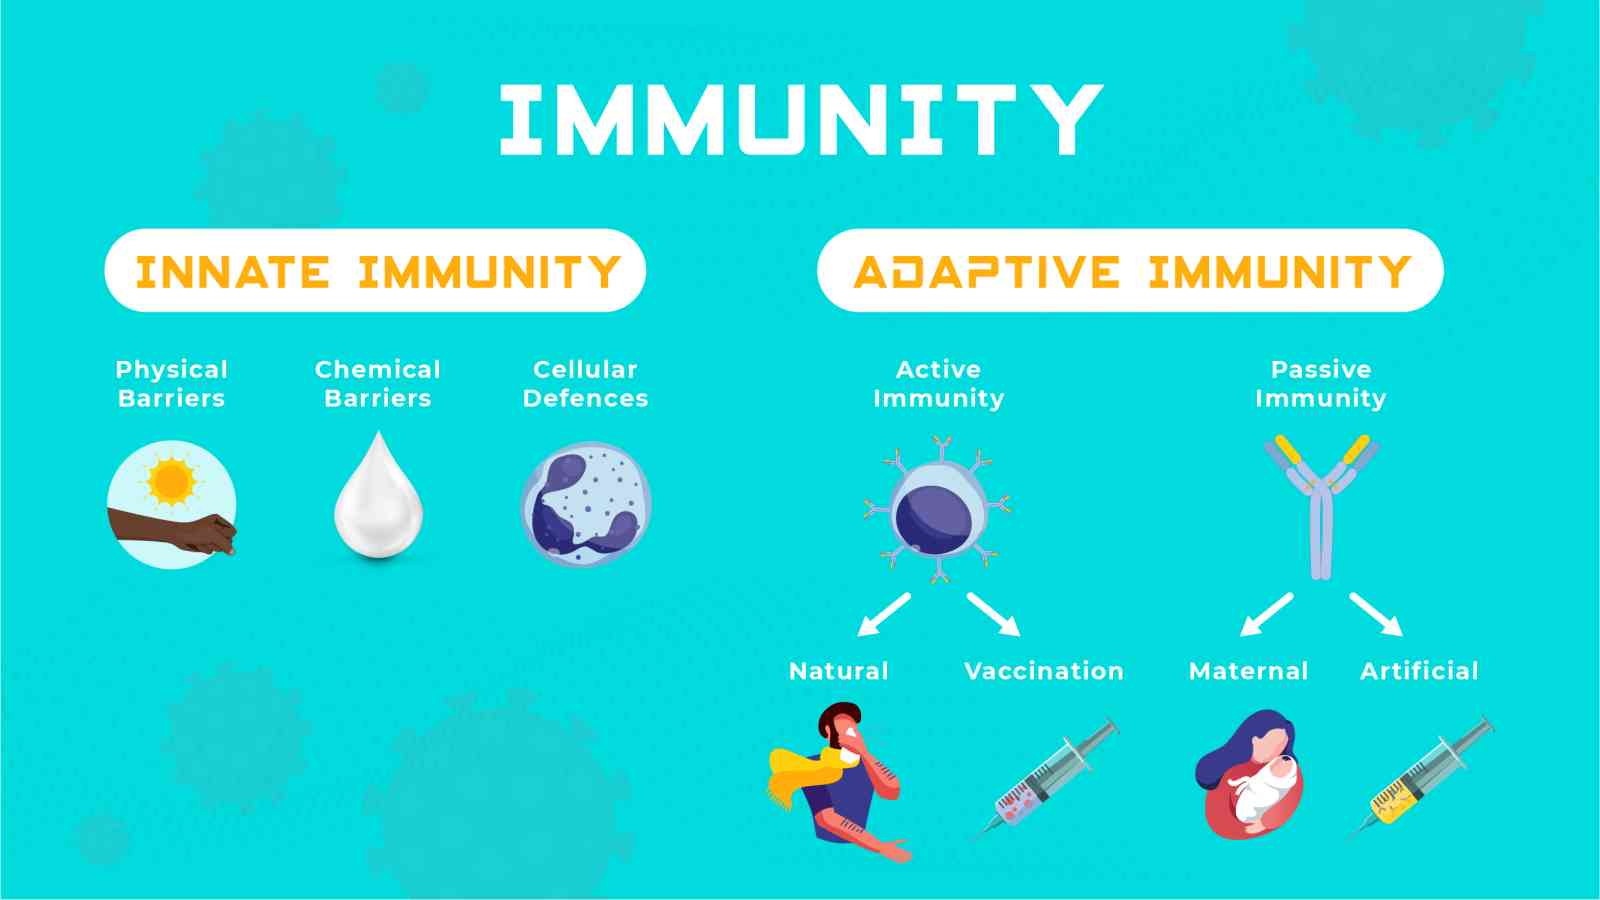 Differences Between Innate and Adaptive Immunity